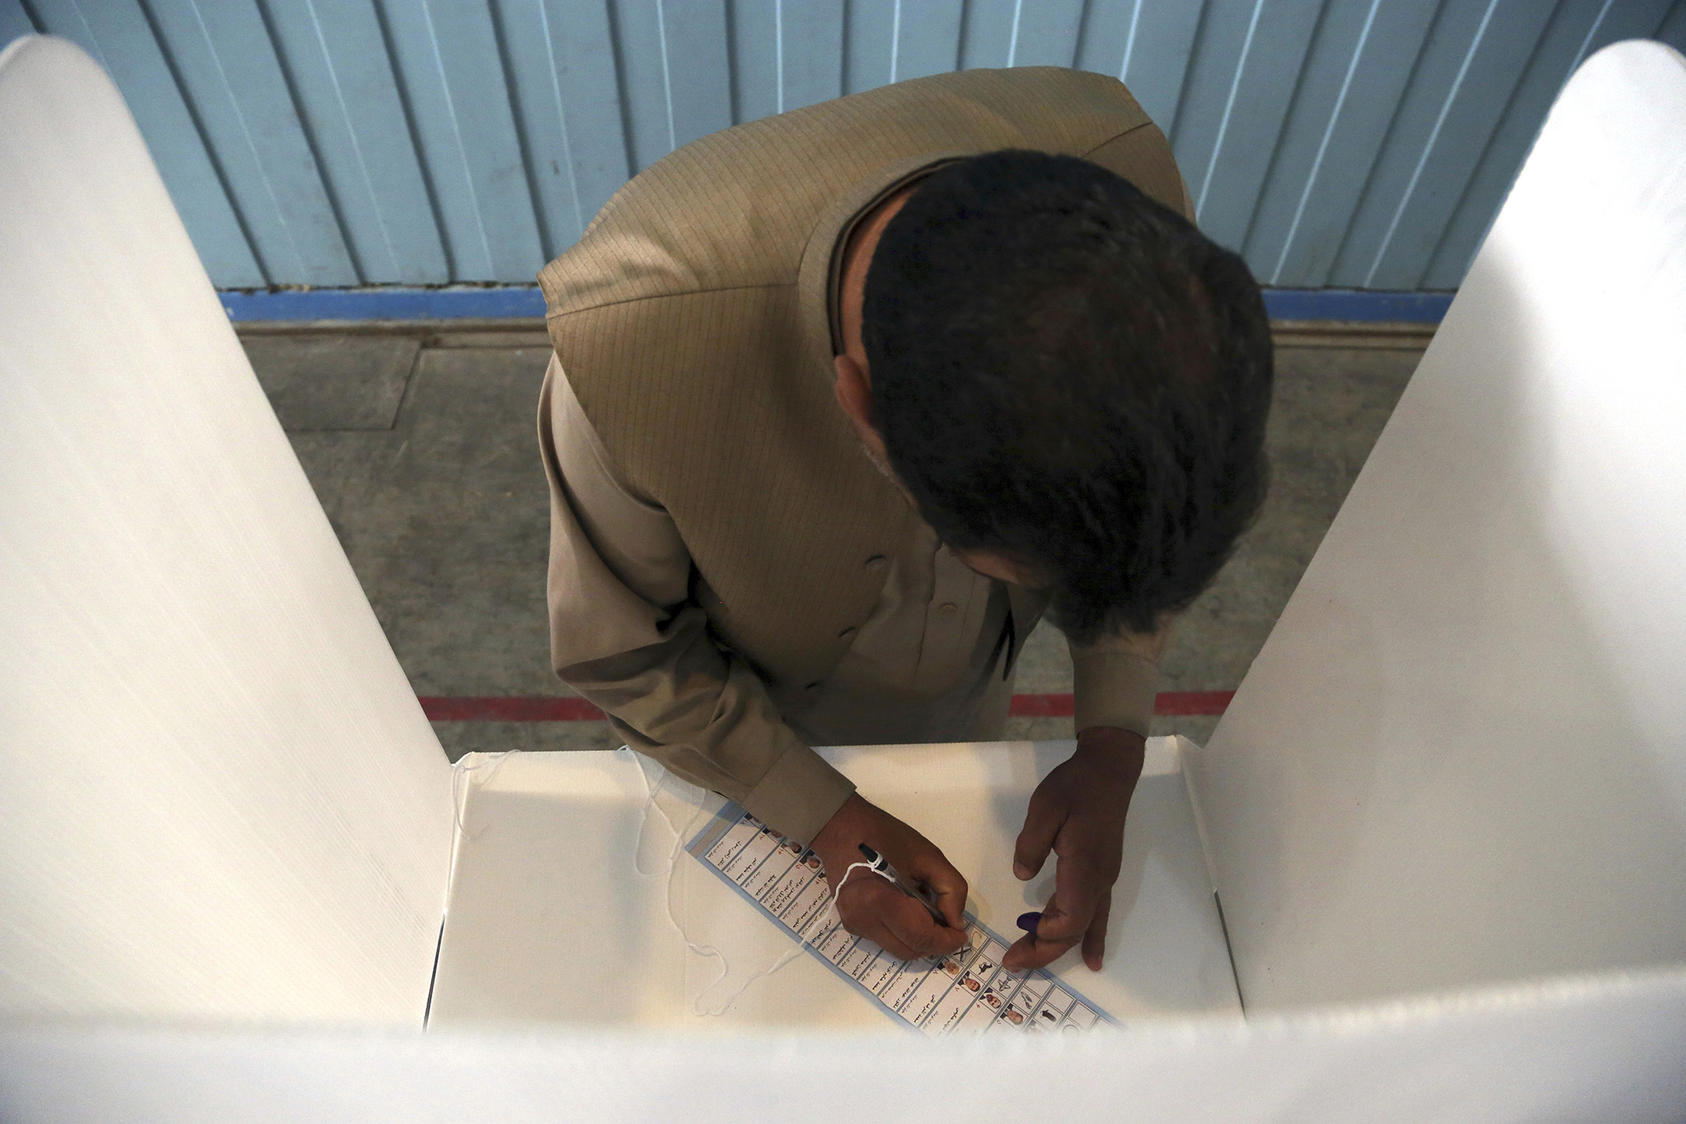 An Afghan man marks a ballot at a polling station in Kabul during the September 28, 2019 presidential election. (AP Photo/Rahmat Gul)